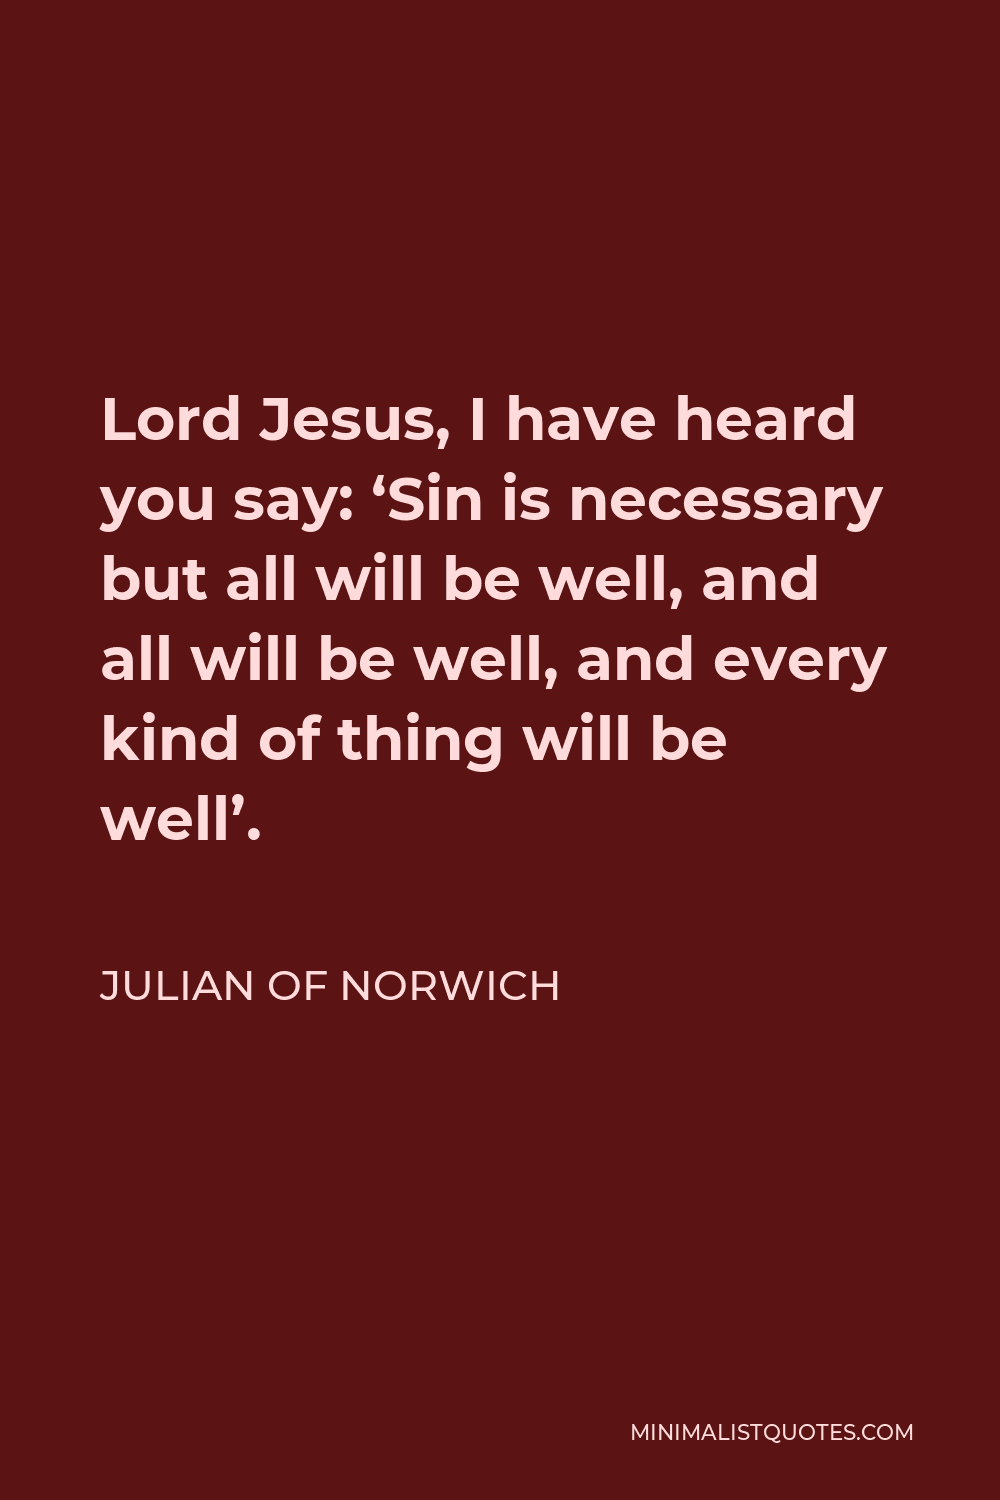 Julian of Norwich Quote - Lord Jesus, I have heard you say: ‘Sin is necessary but all will be well, and all will be well, and every kind of thing will be well’.